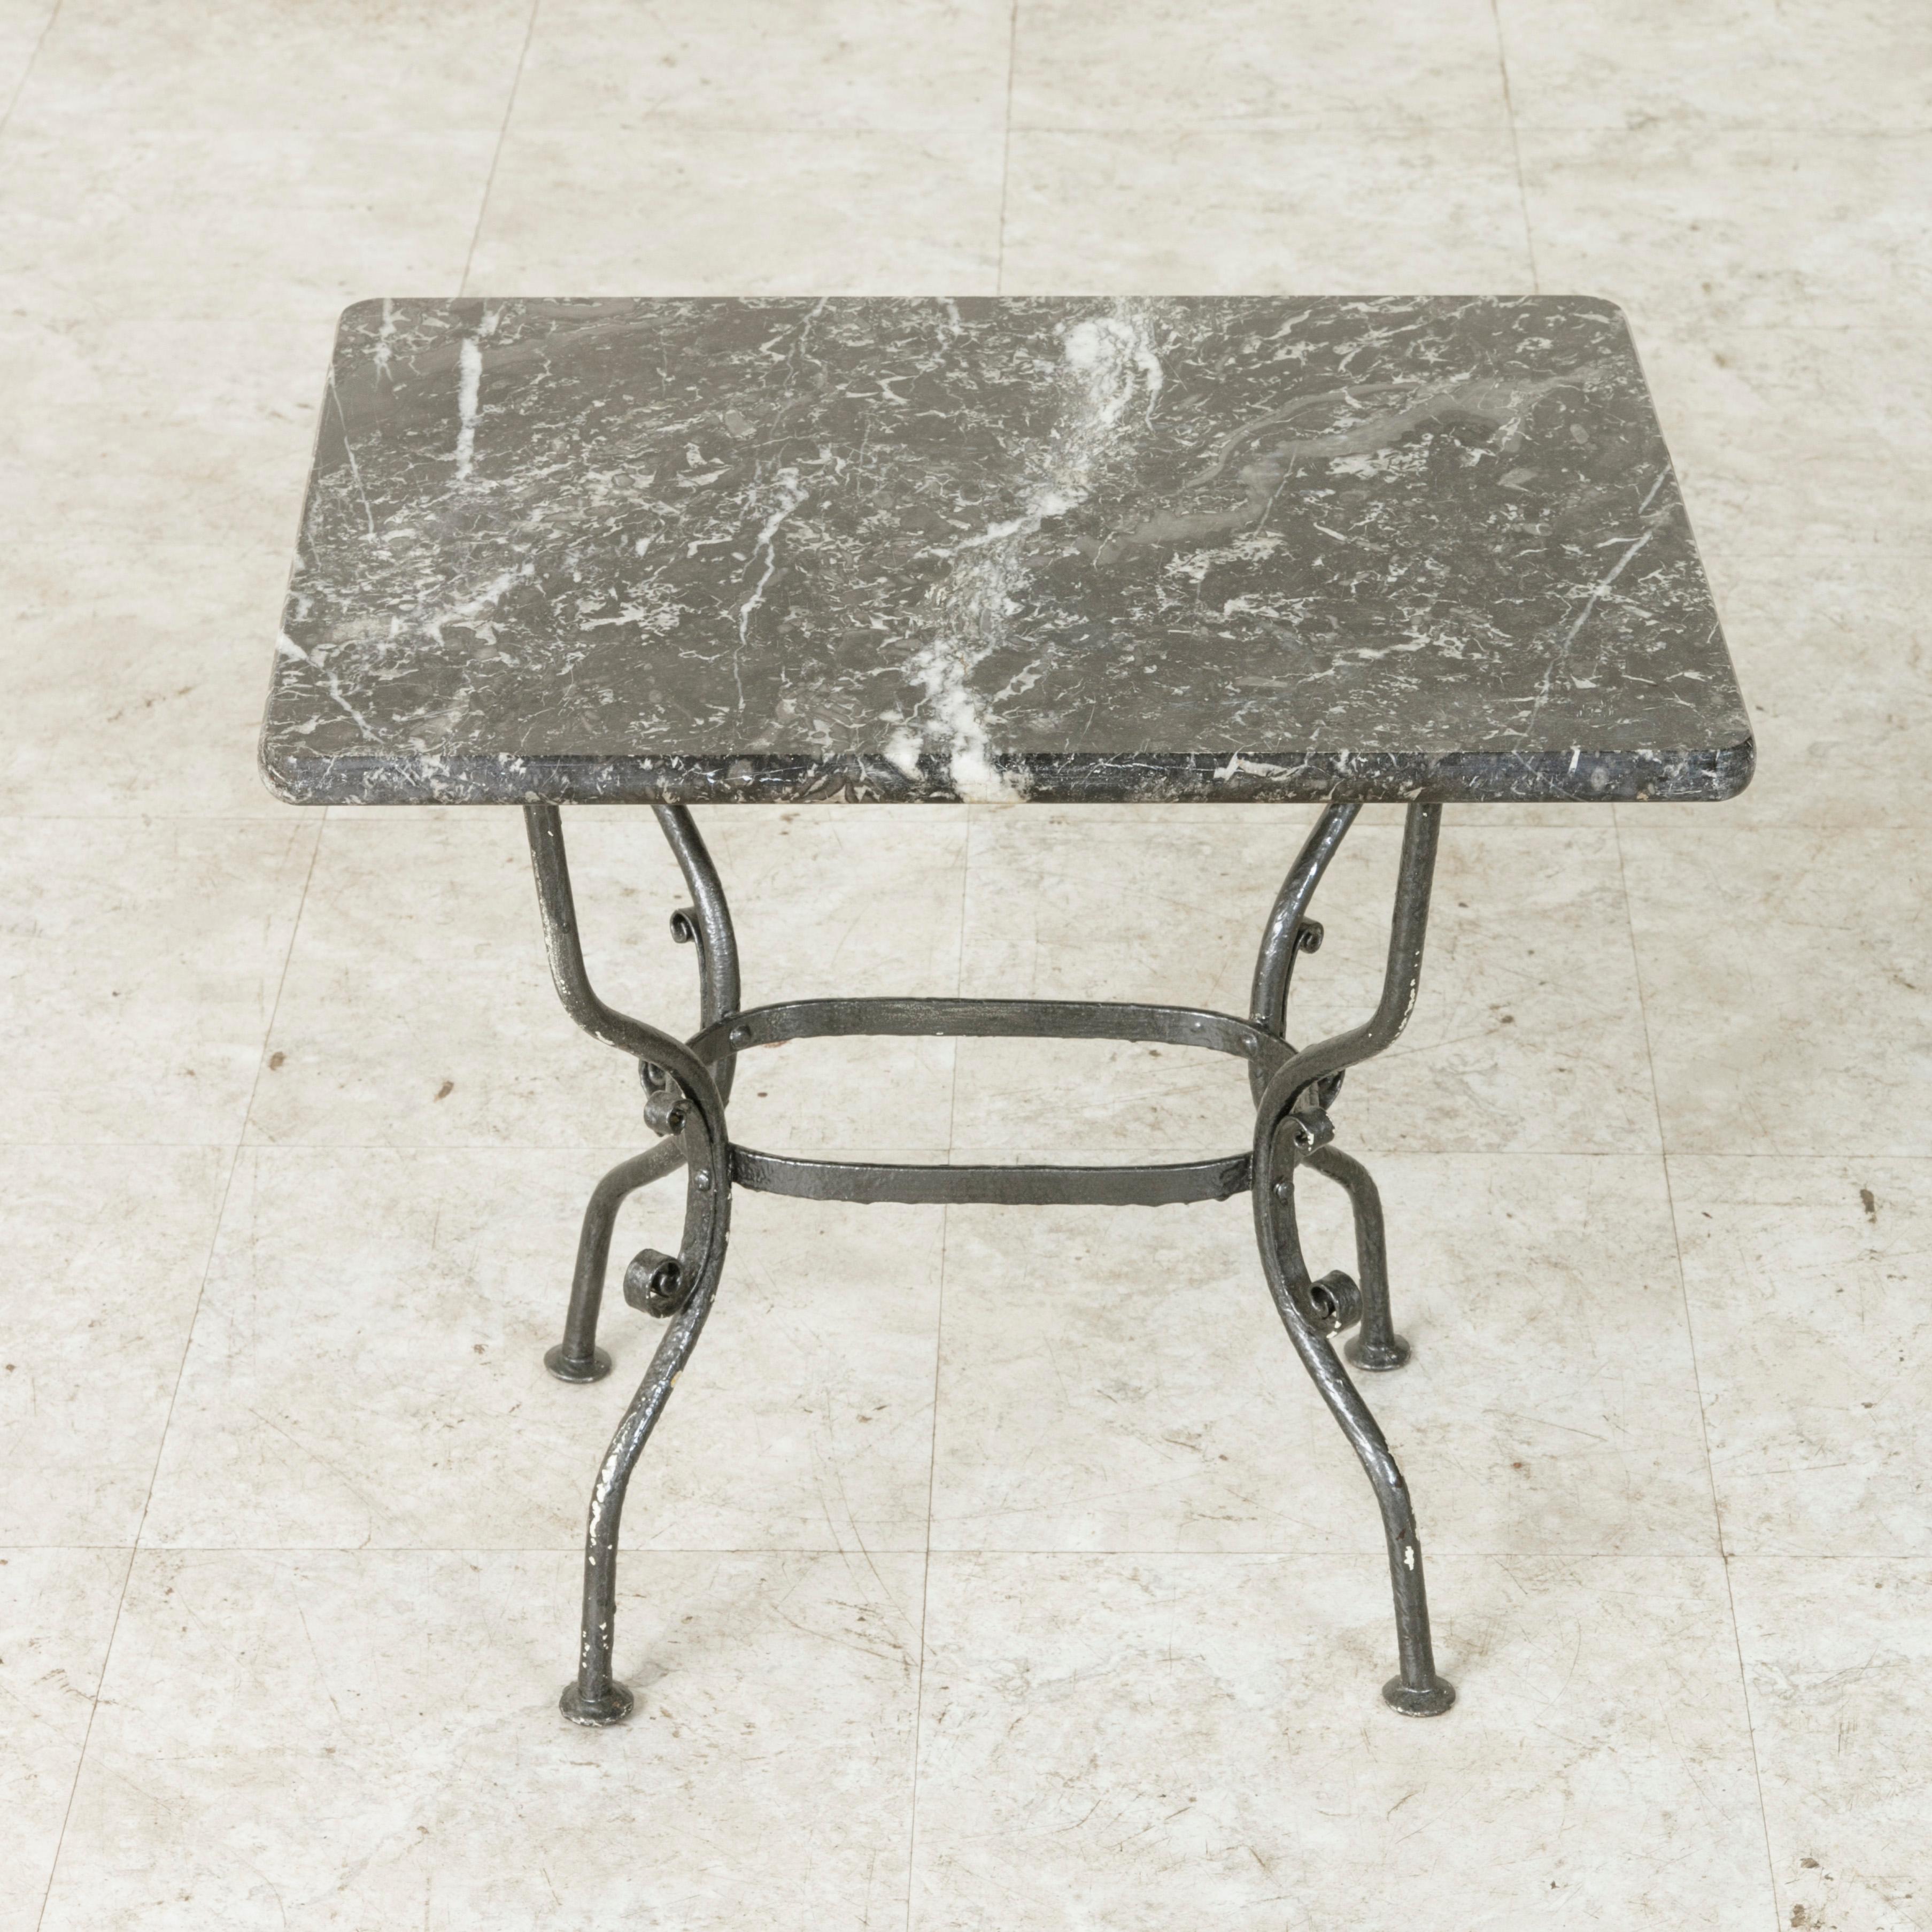 This mid-20th century French side table or end table features a Saint Anne marble top that rests on a hand-forged iron base. The base has four curved legs that are joined by a ring stretcher in the centre and is detailed with scrolling. Its small